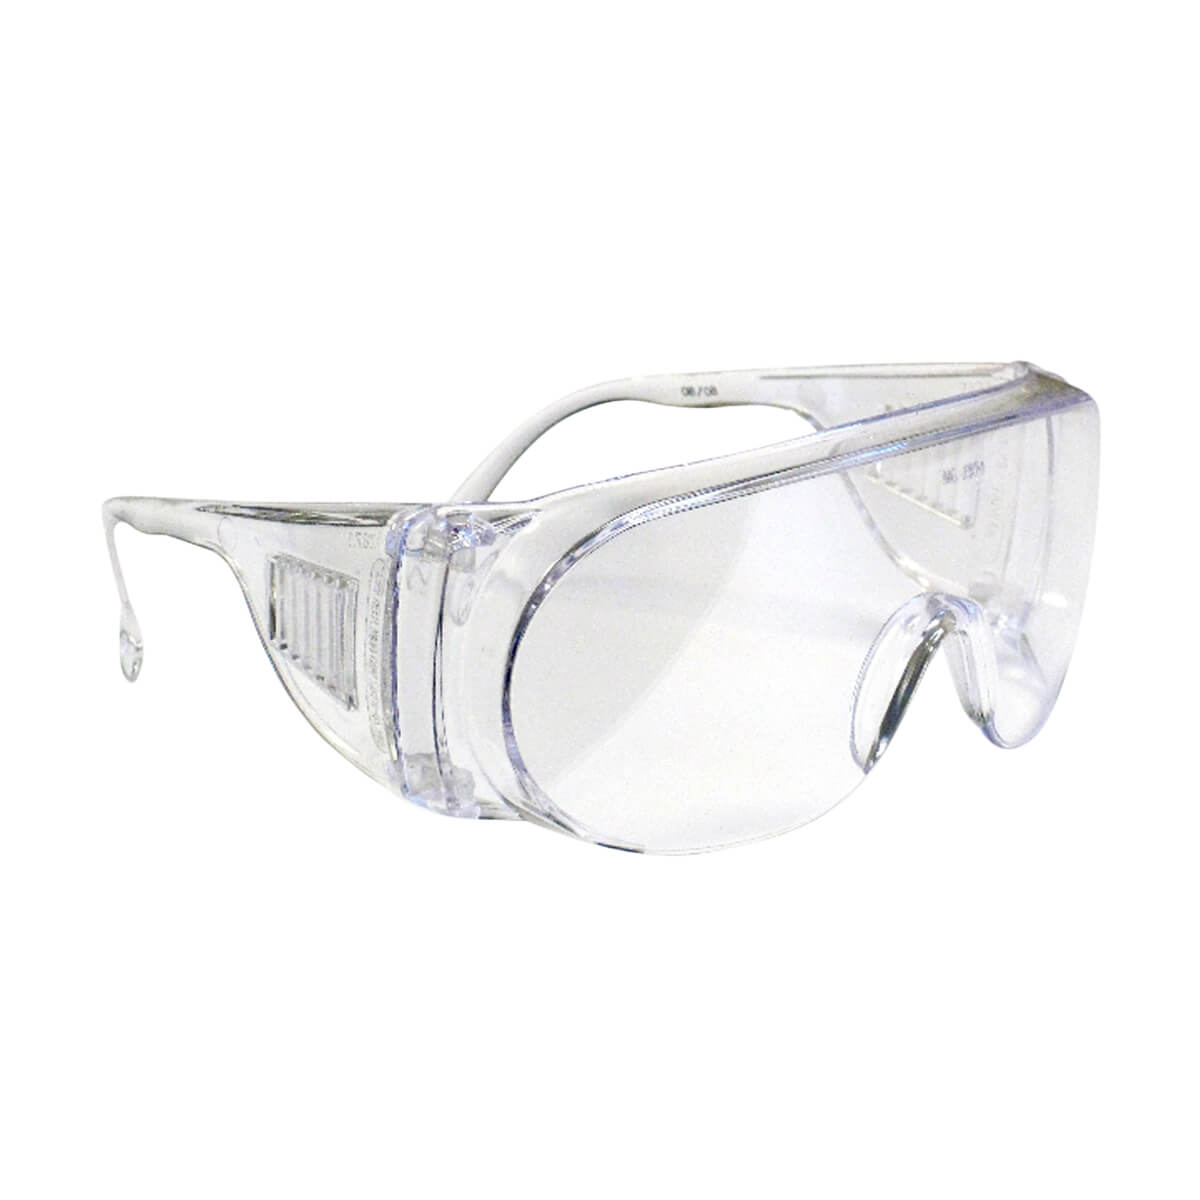 WorkHorse® Visitor Safety Glasses